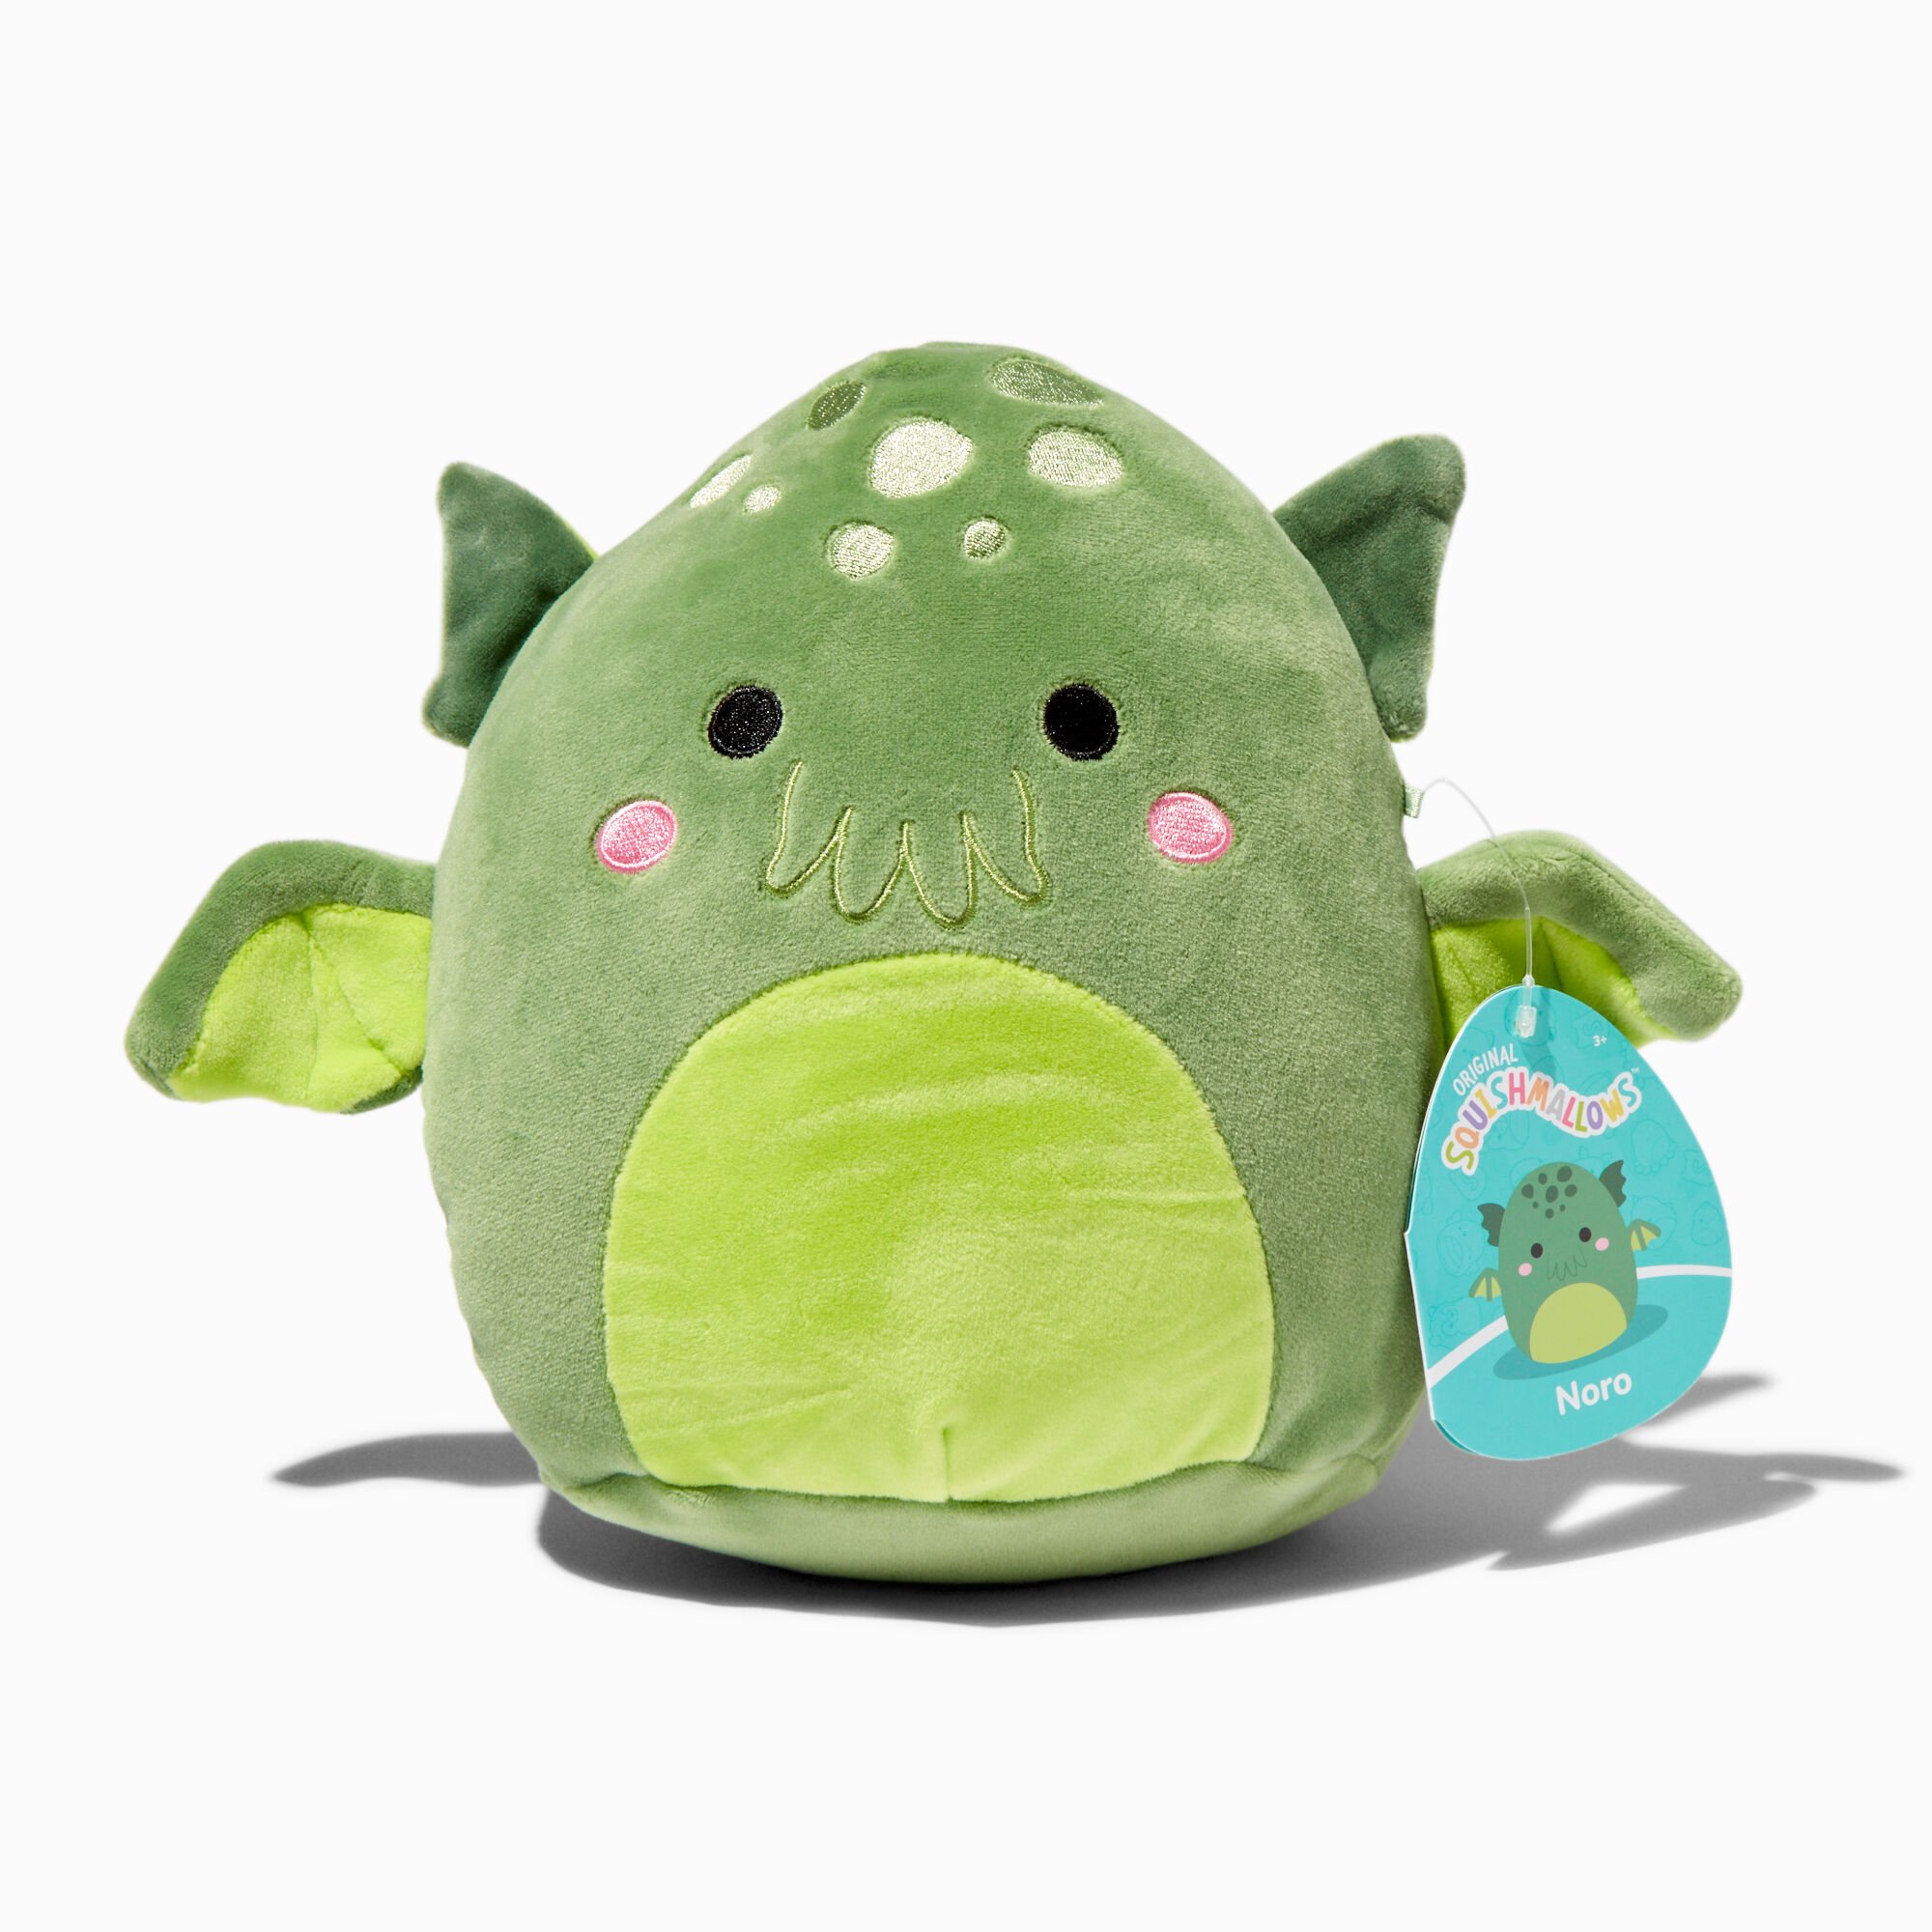 View Claires Squishmallows 8 Noro The Dragon Plush Toy Green information